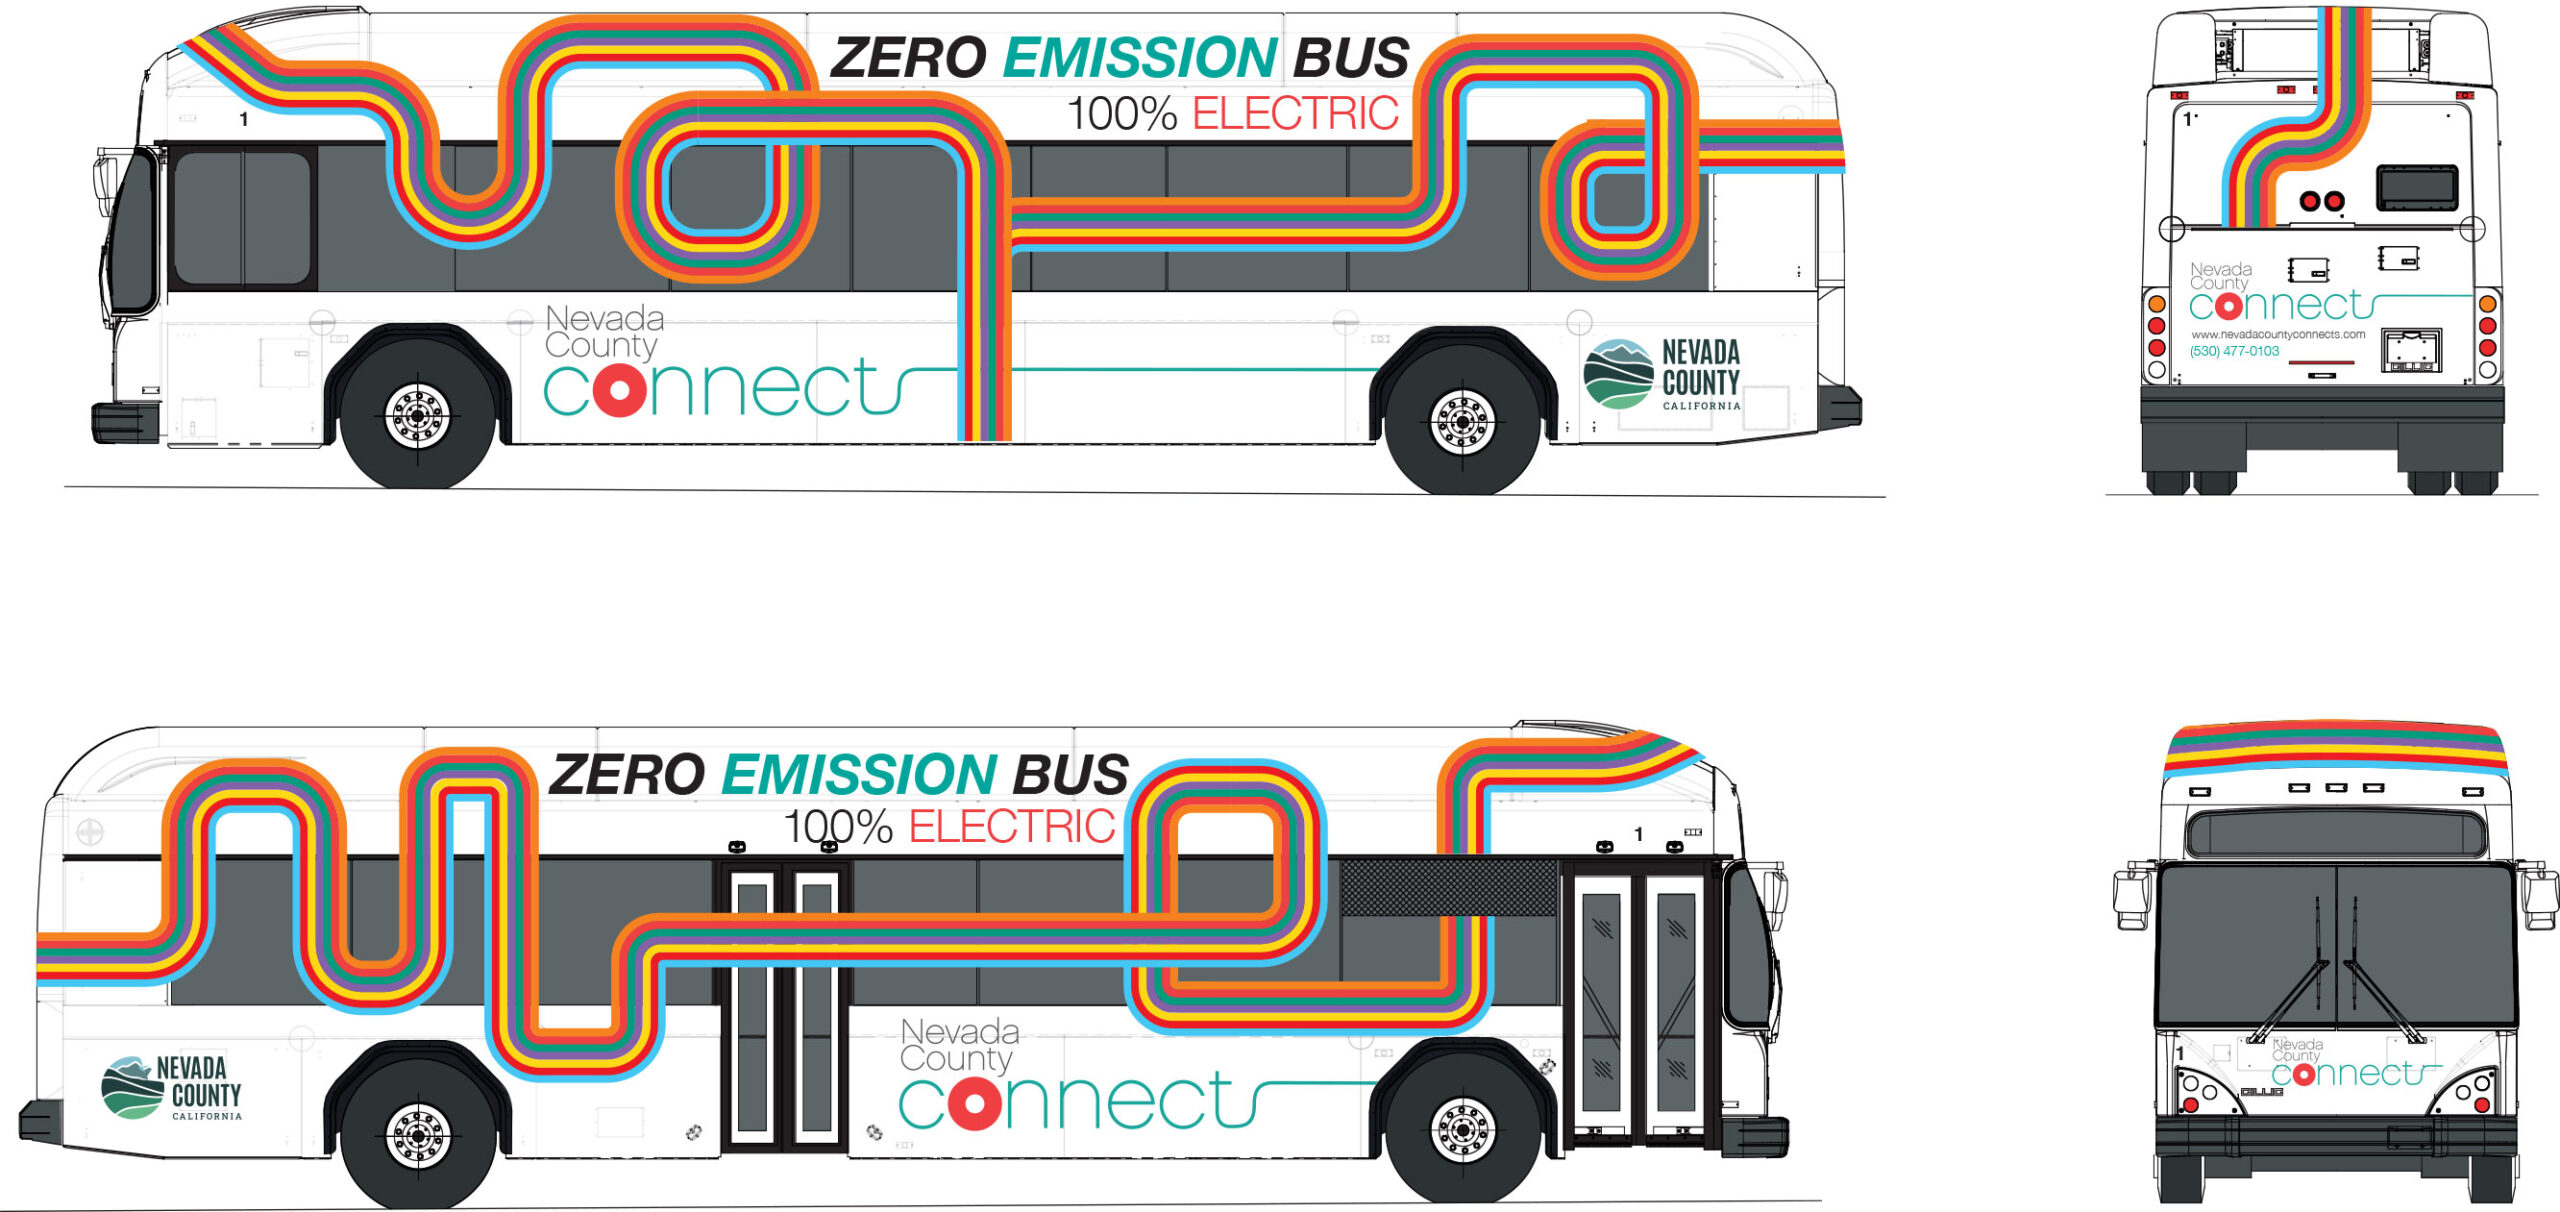 Jason_malmberg_designer_california A drawing of a bus with different colors on it.